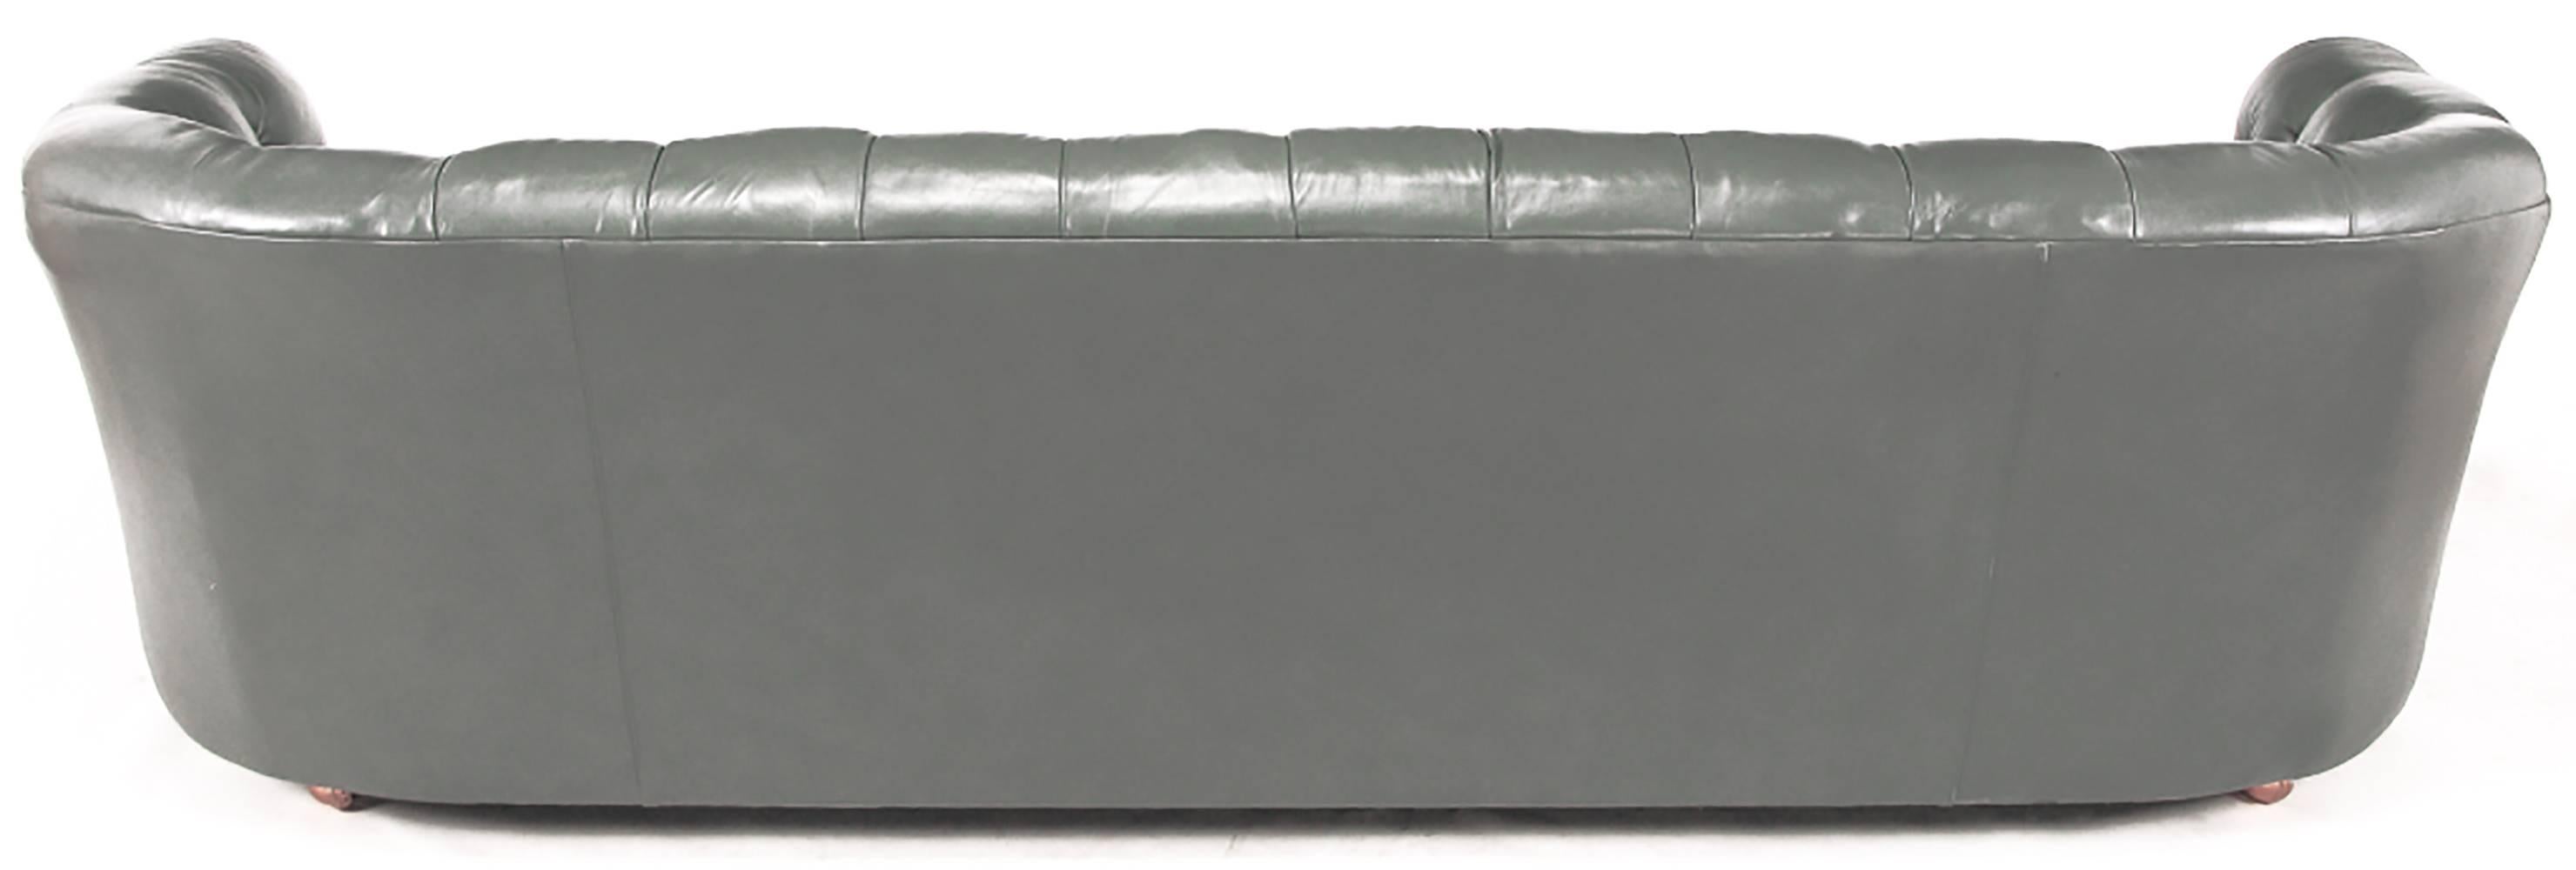 American Baker Slate Grey Button-Tufted Leather Sofa